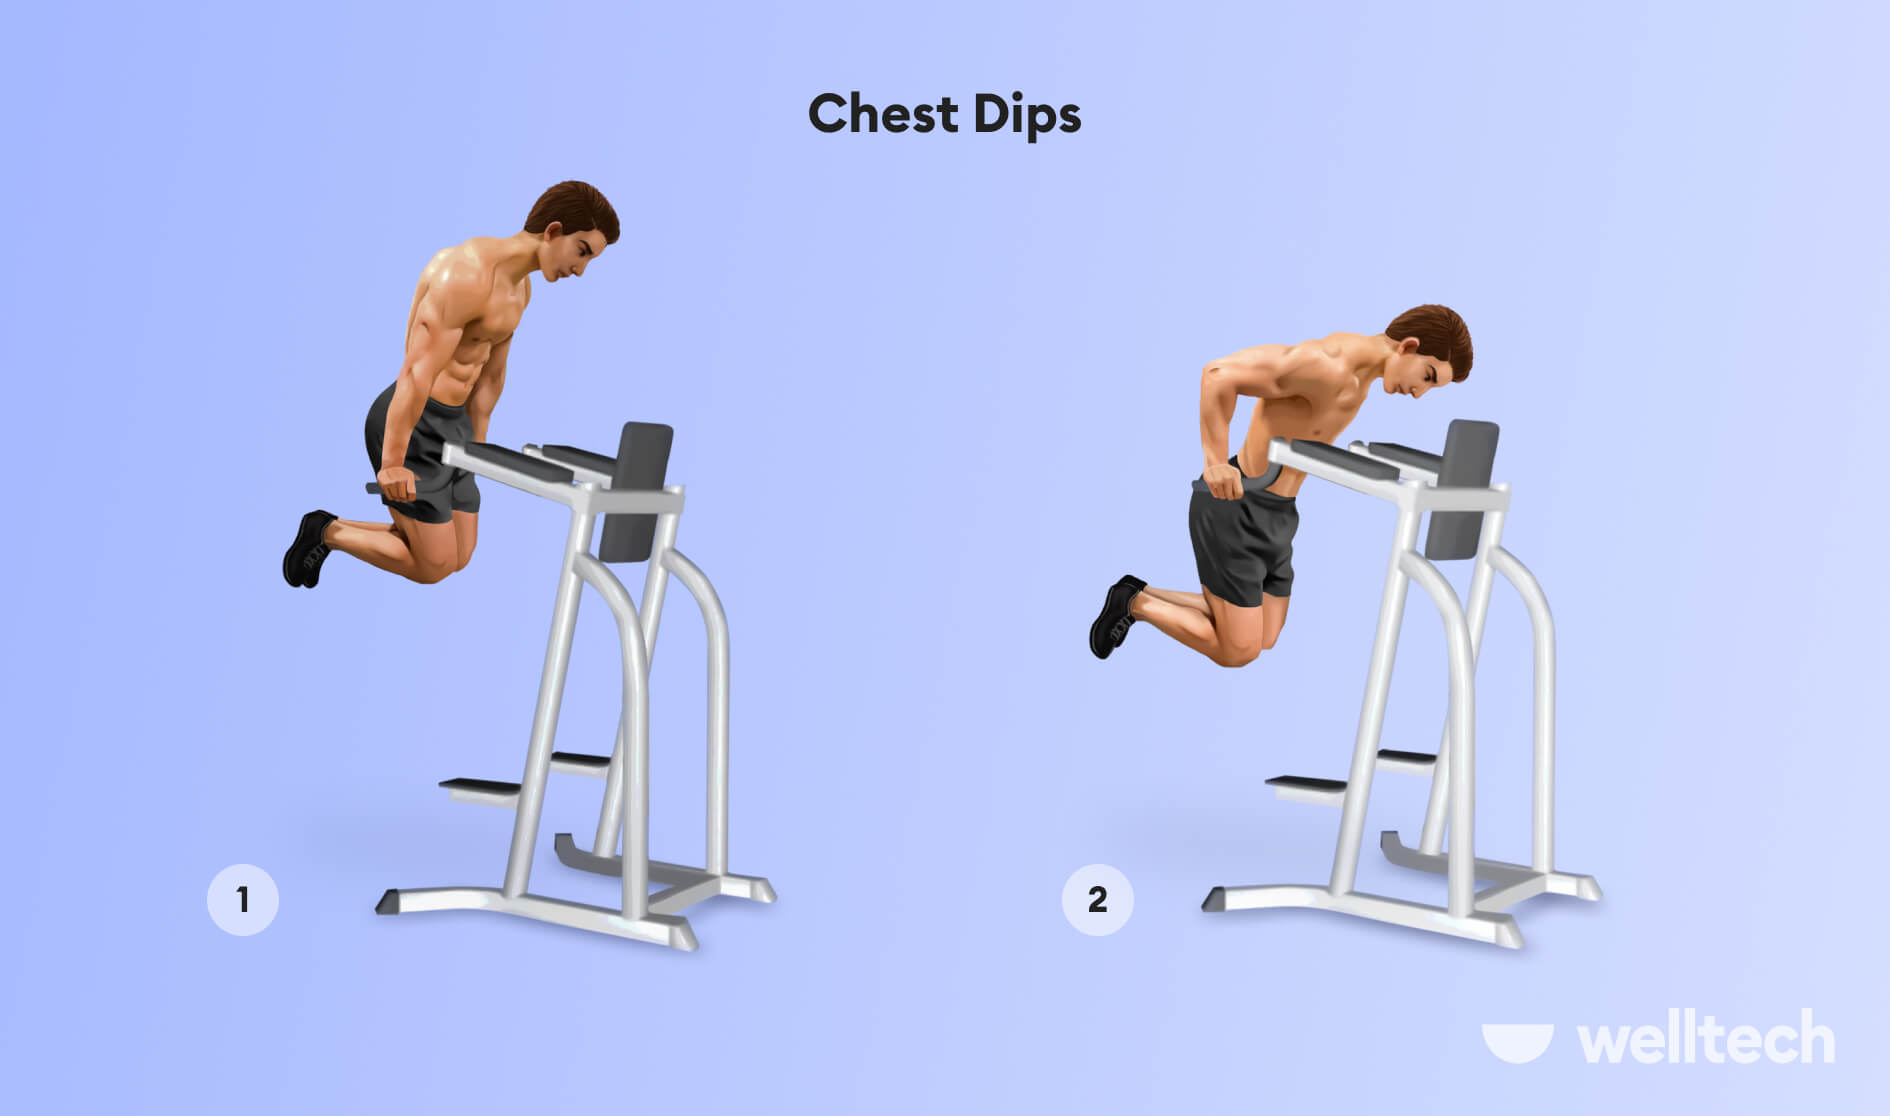 a man is performing chest dips on a captain's chair, inner chest workout